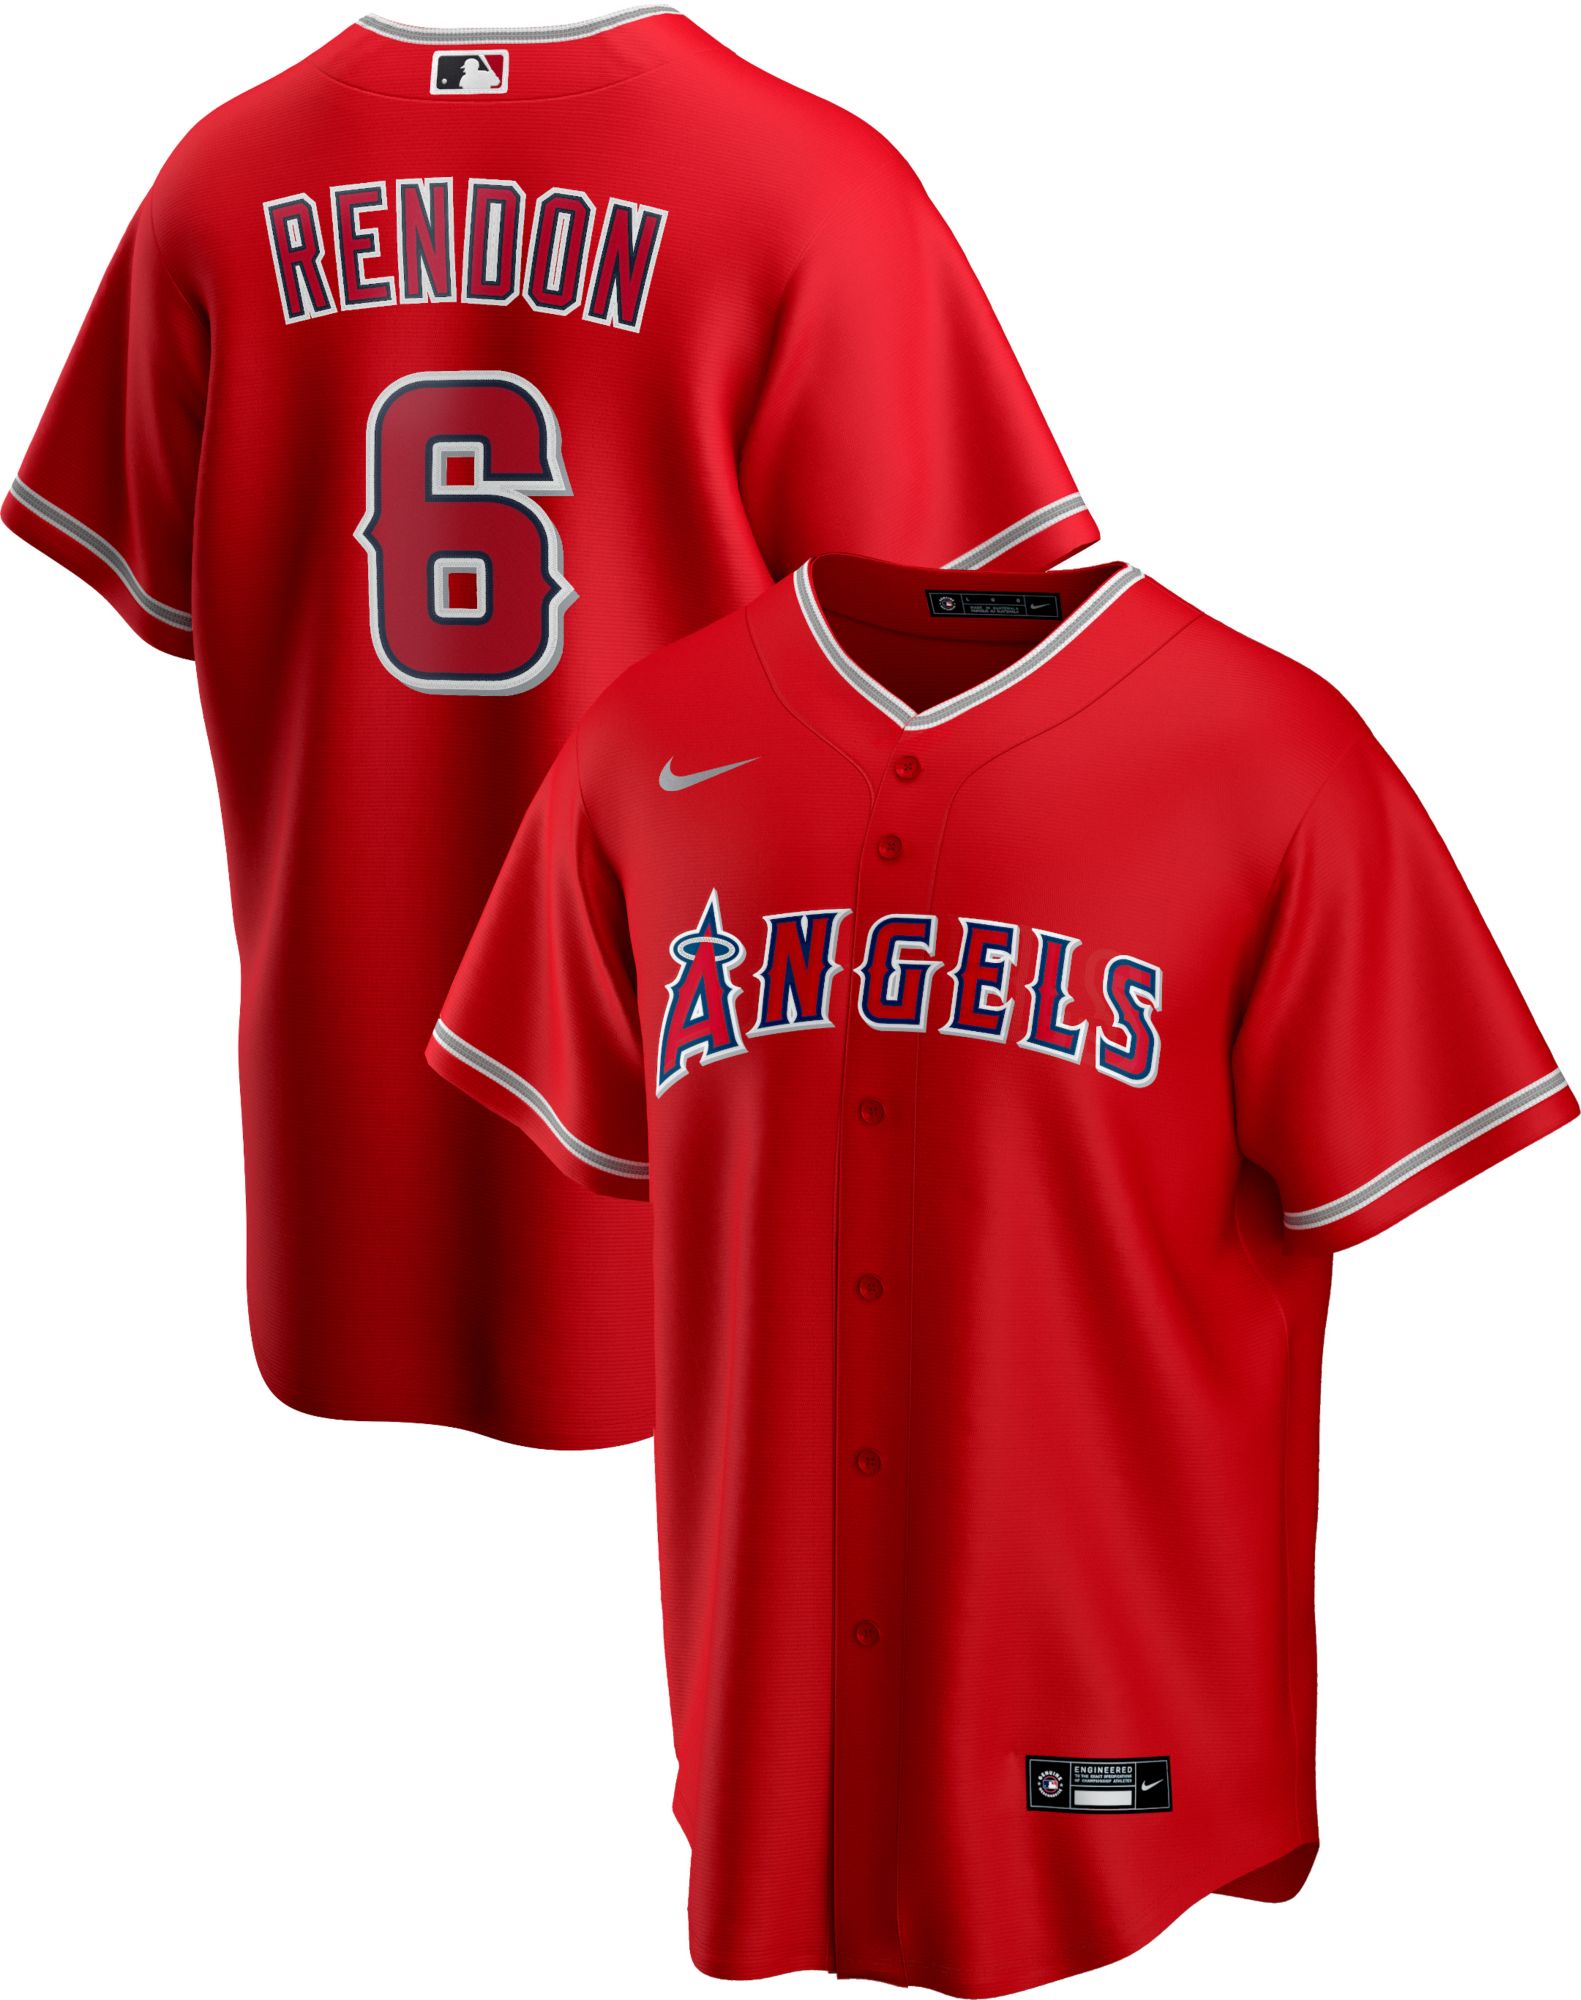 Anthony Rendon #6 Cool Base Red Jersey 